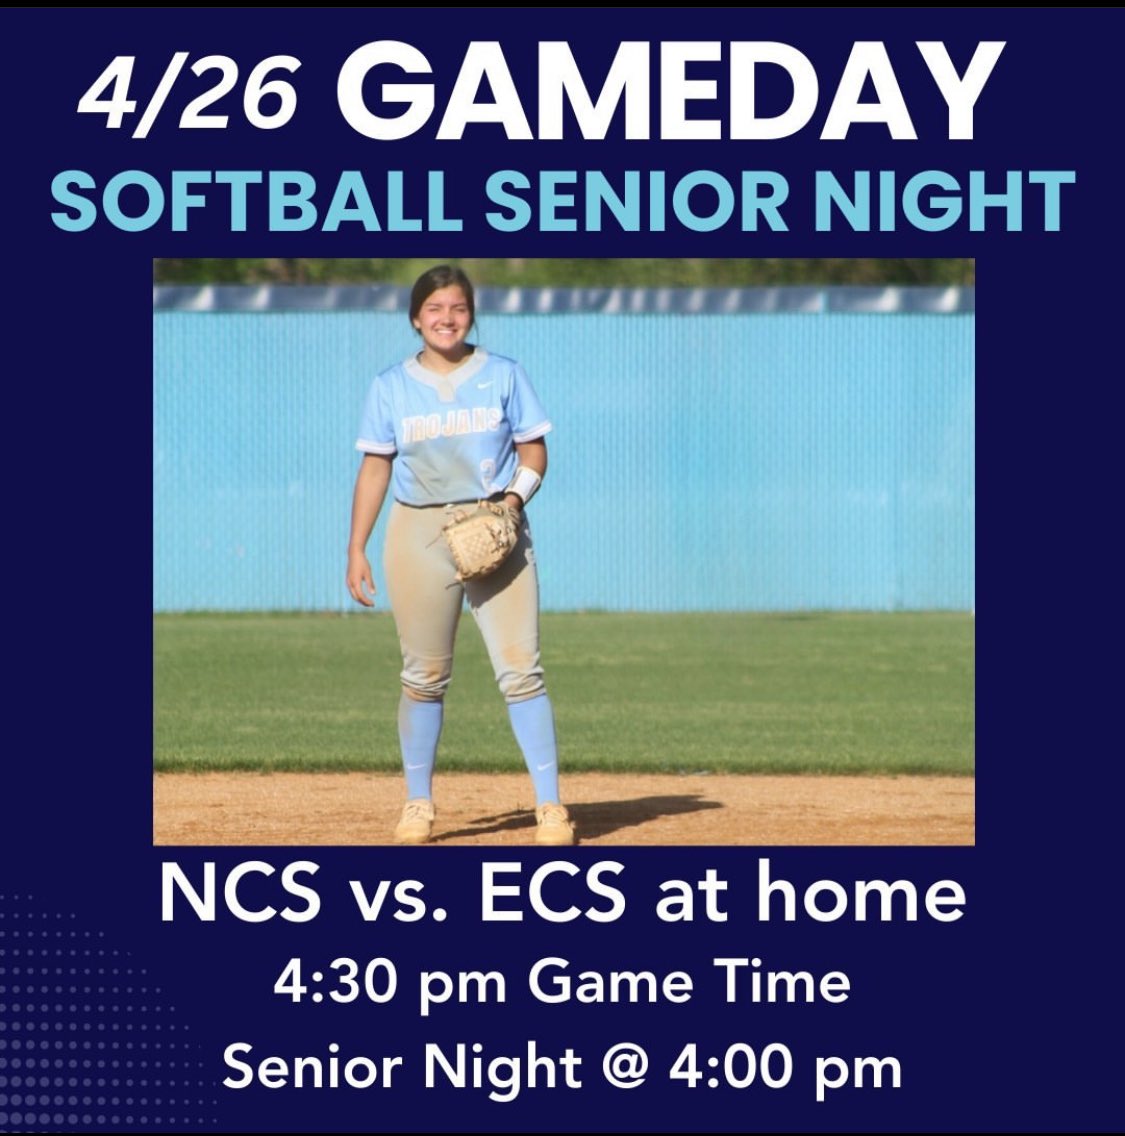 The NCS Softball Team is closing out the regular season district schedule today with a big game against ECS at 4:30 pm. We need our fans! Additionally, tonight is SENIOR NIGHT at 4 pm for Sailor Cole. Make plans to #PackThePoint for Sailor and Northpoint softball today!!